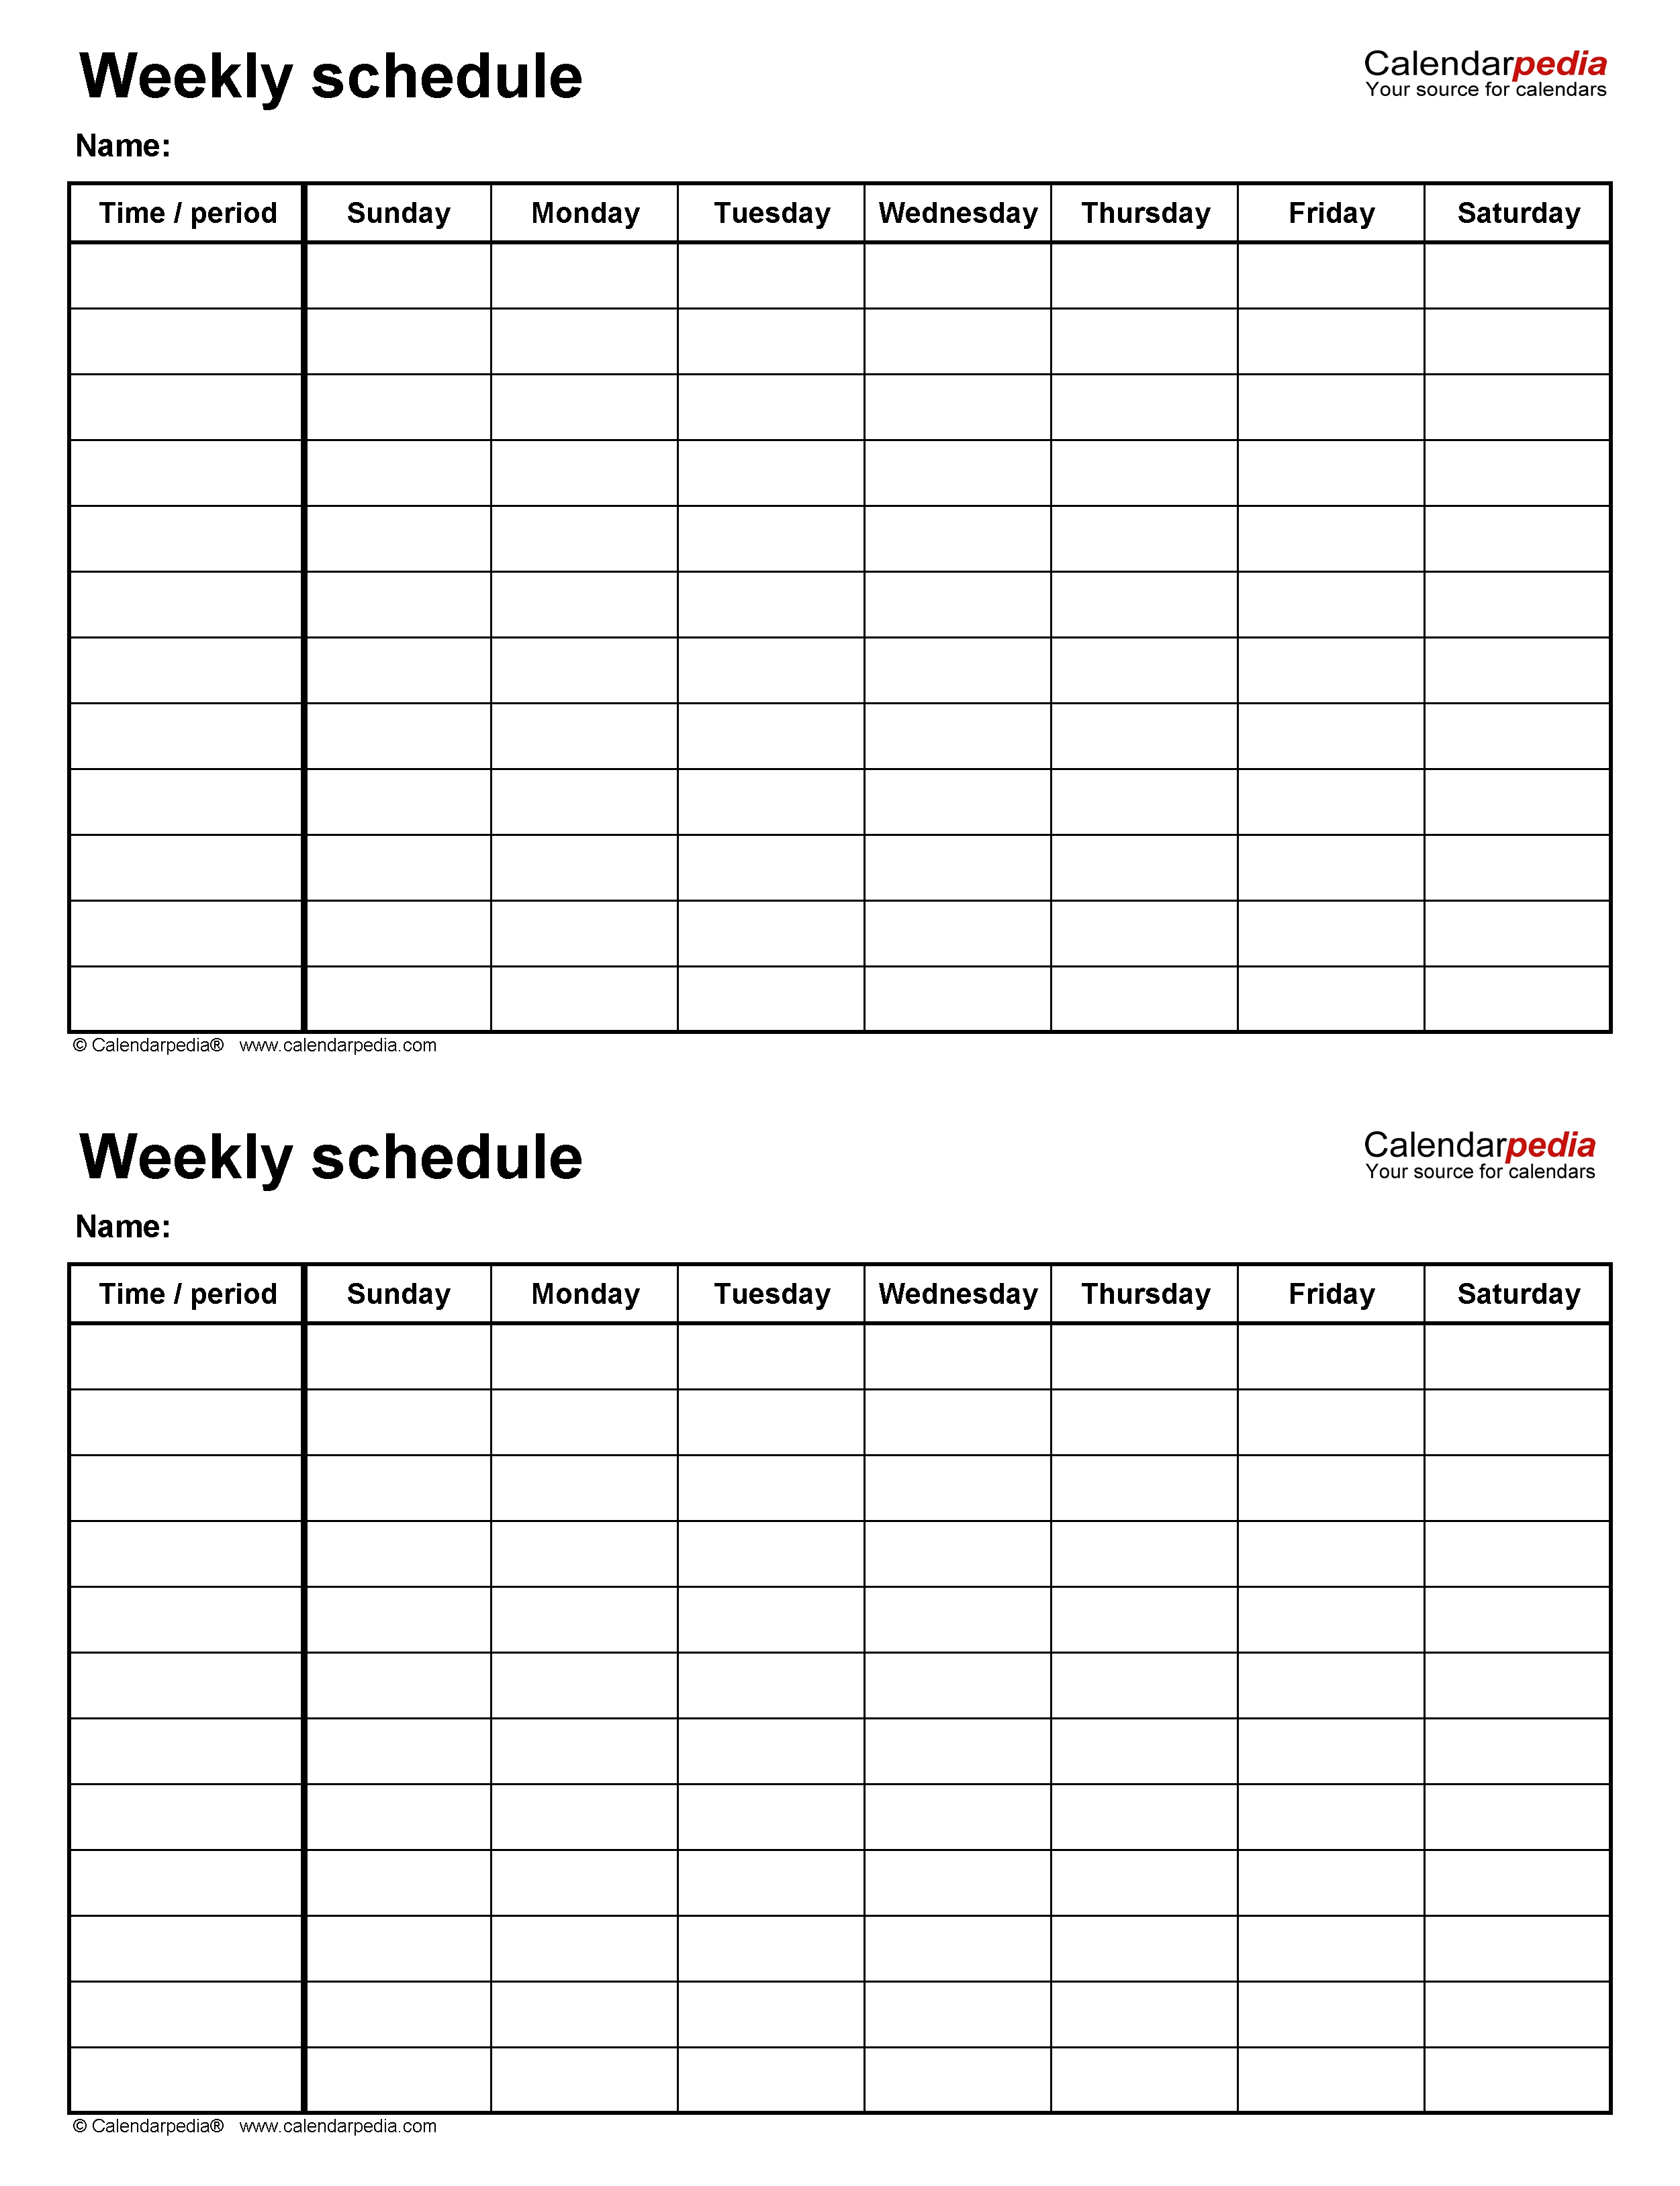 Free Weekly Schedule Templates For Word - 18 Templates